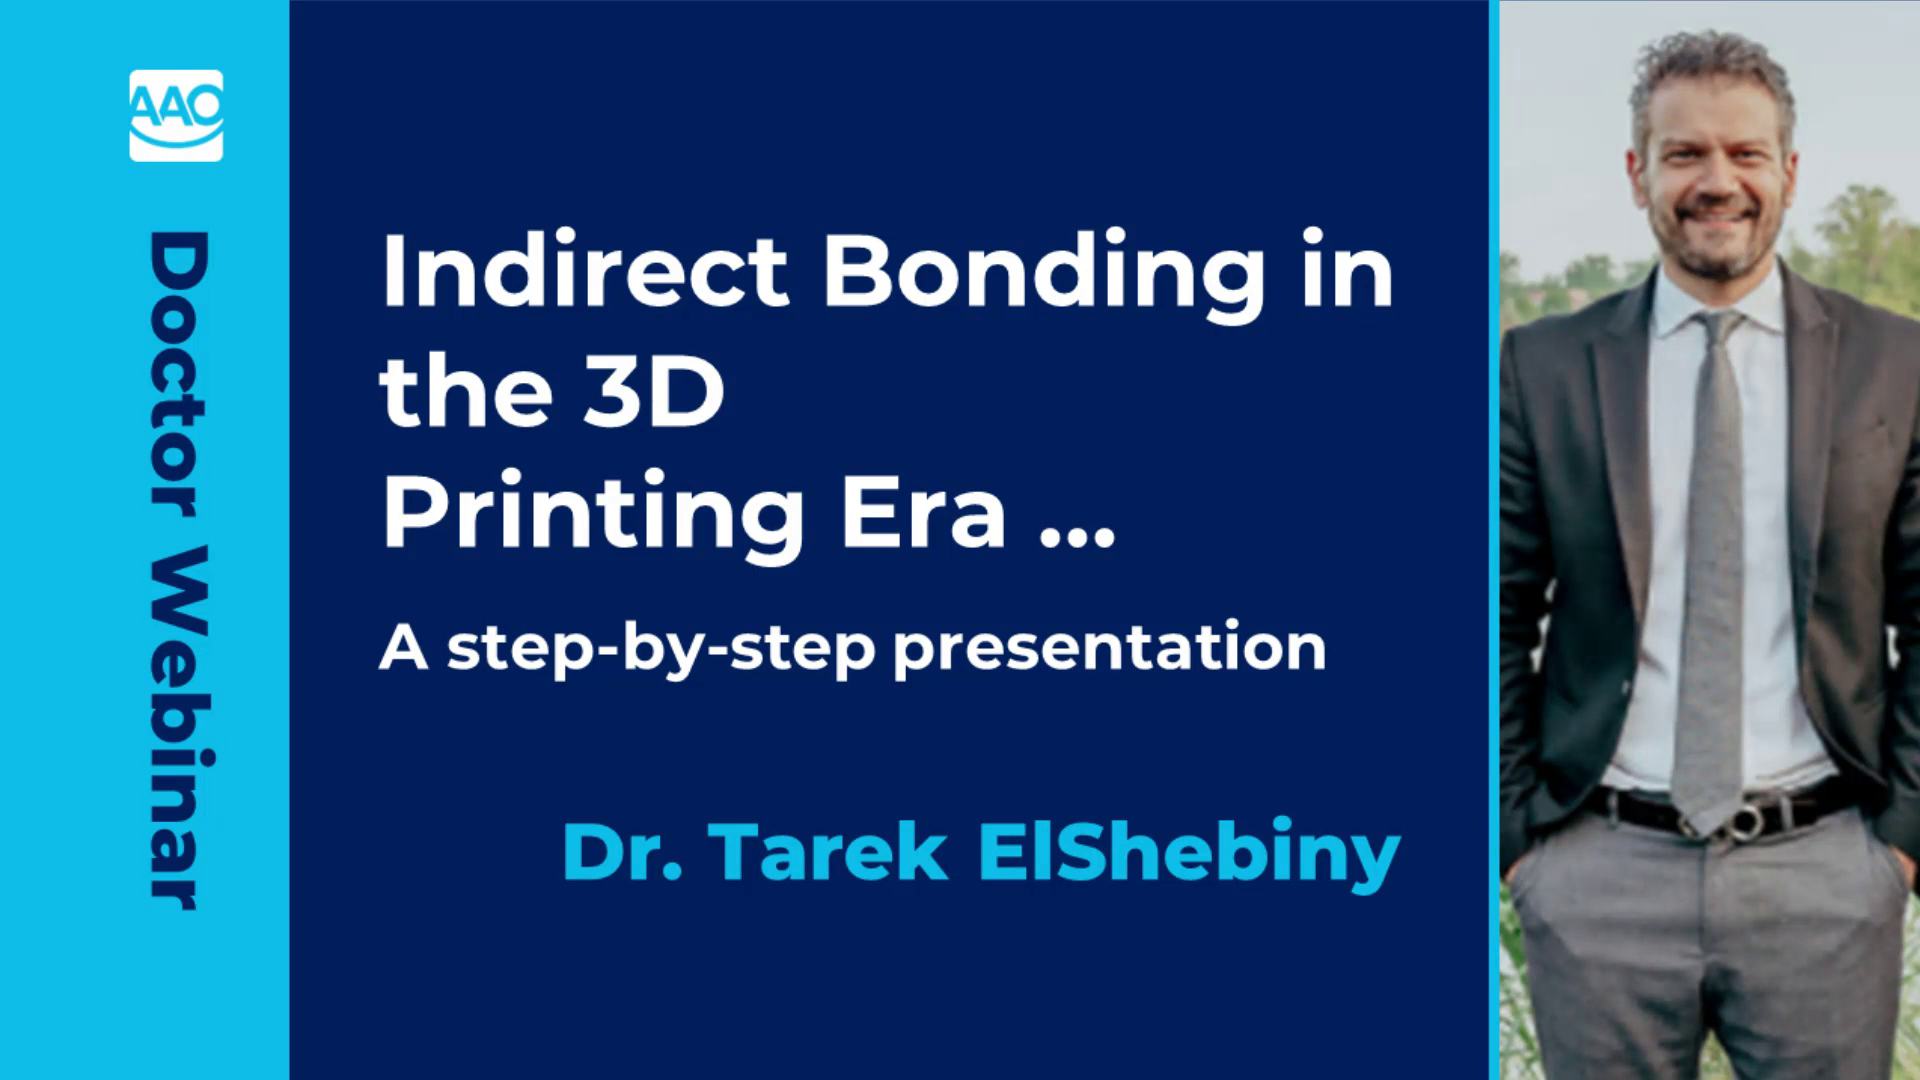 Indirect Bonding in the 3D Printing Era ...A step by step presentation